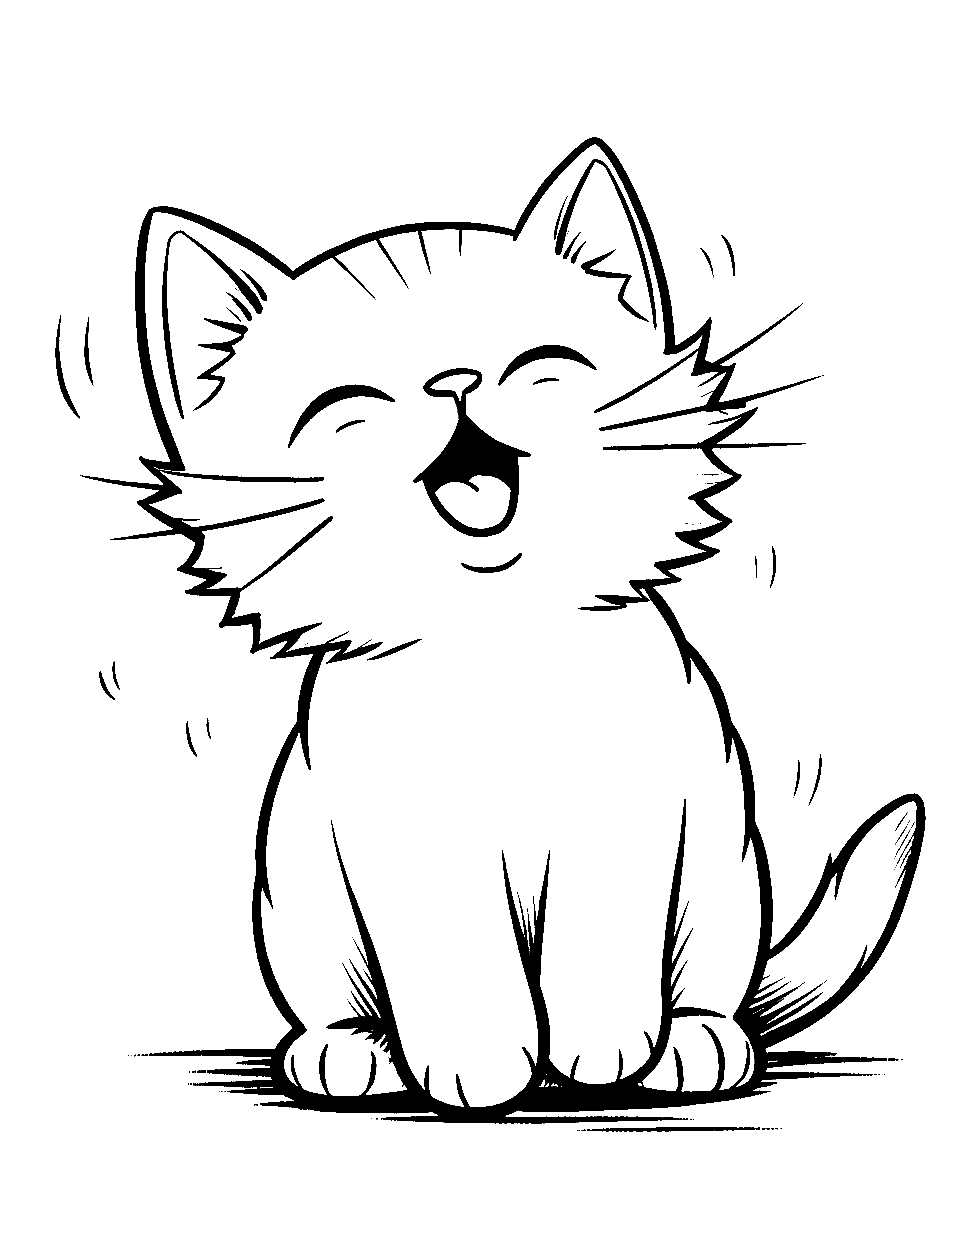 Little Kitten's Big Yawn Kitten Coloring Page - A little kitten yawning after its nap.